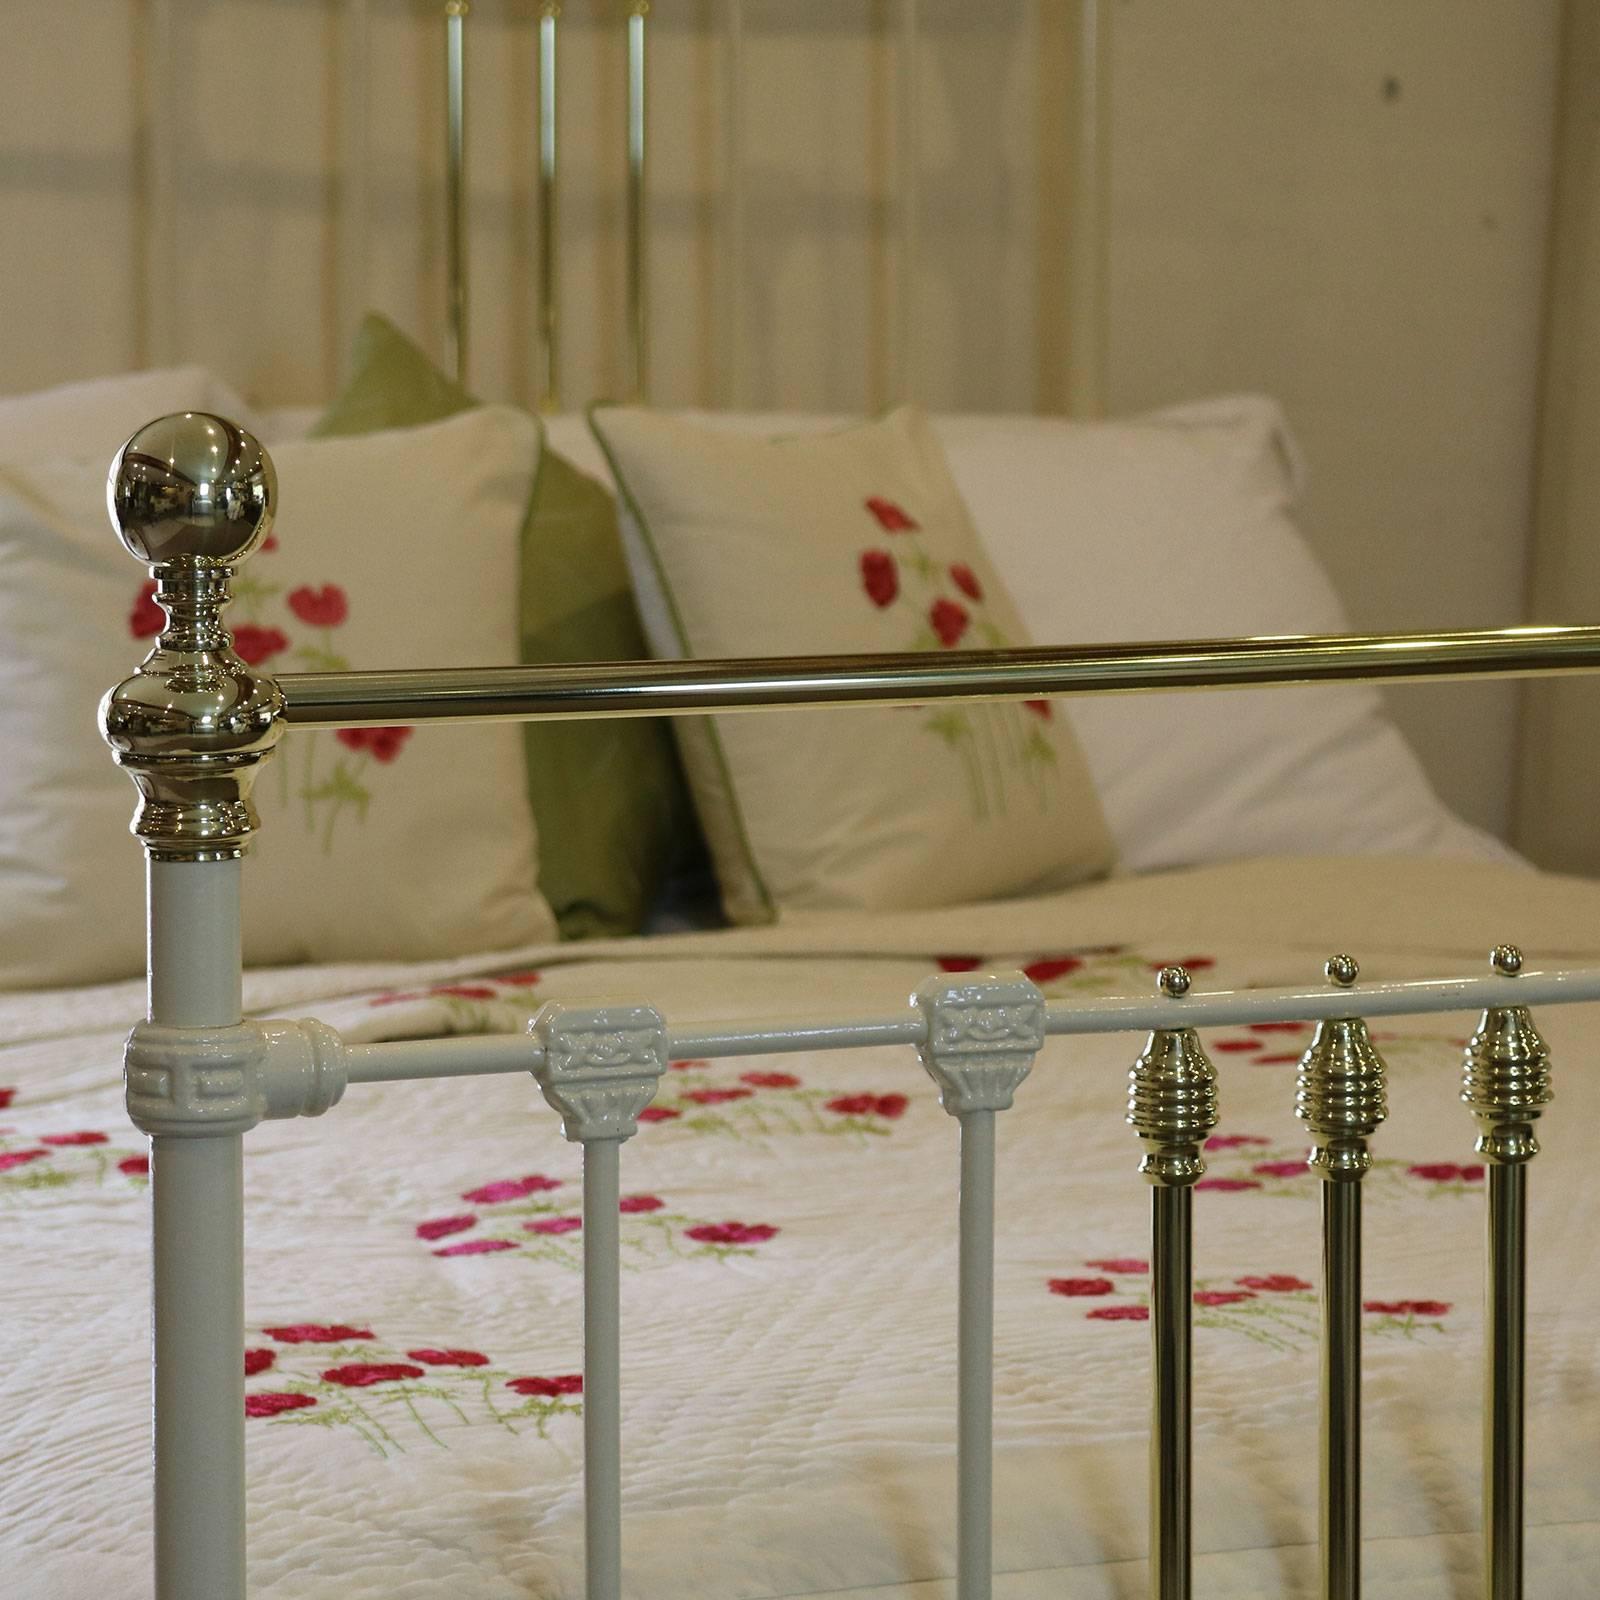 English Wide Brass and Iron Bed in Cream, MK81